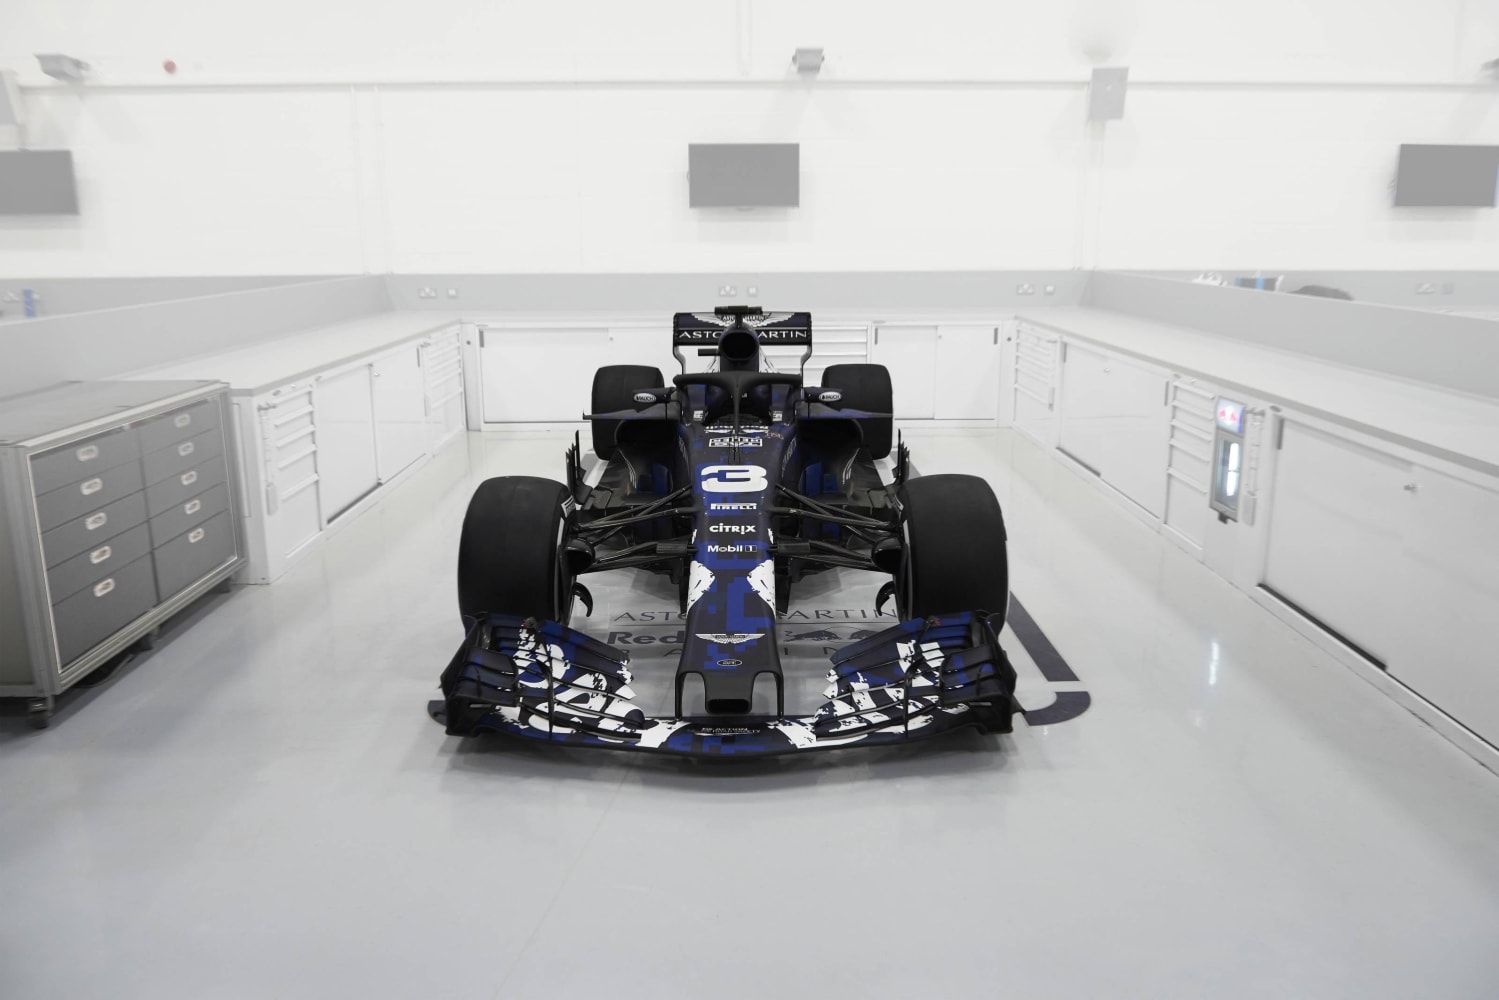 Aston Martin Red Bull Racing RB14 reveal w/ blue livery